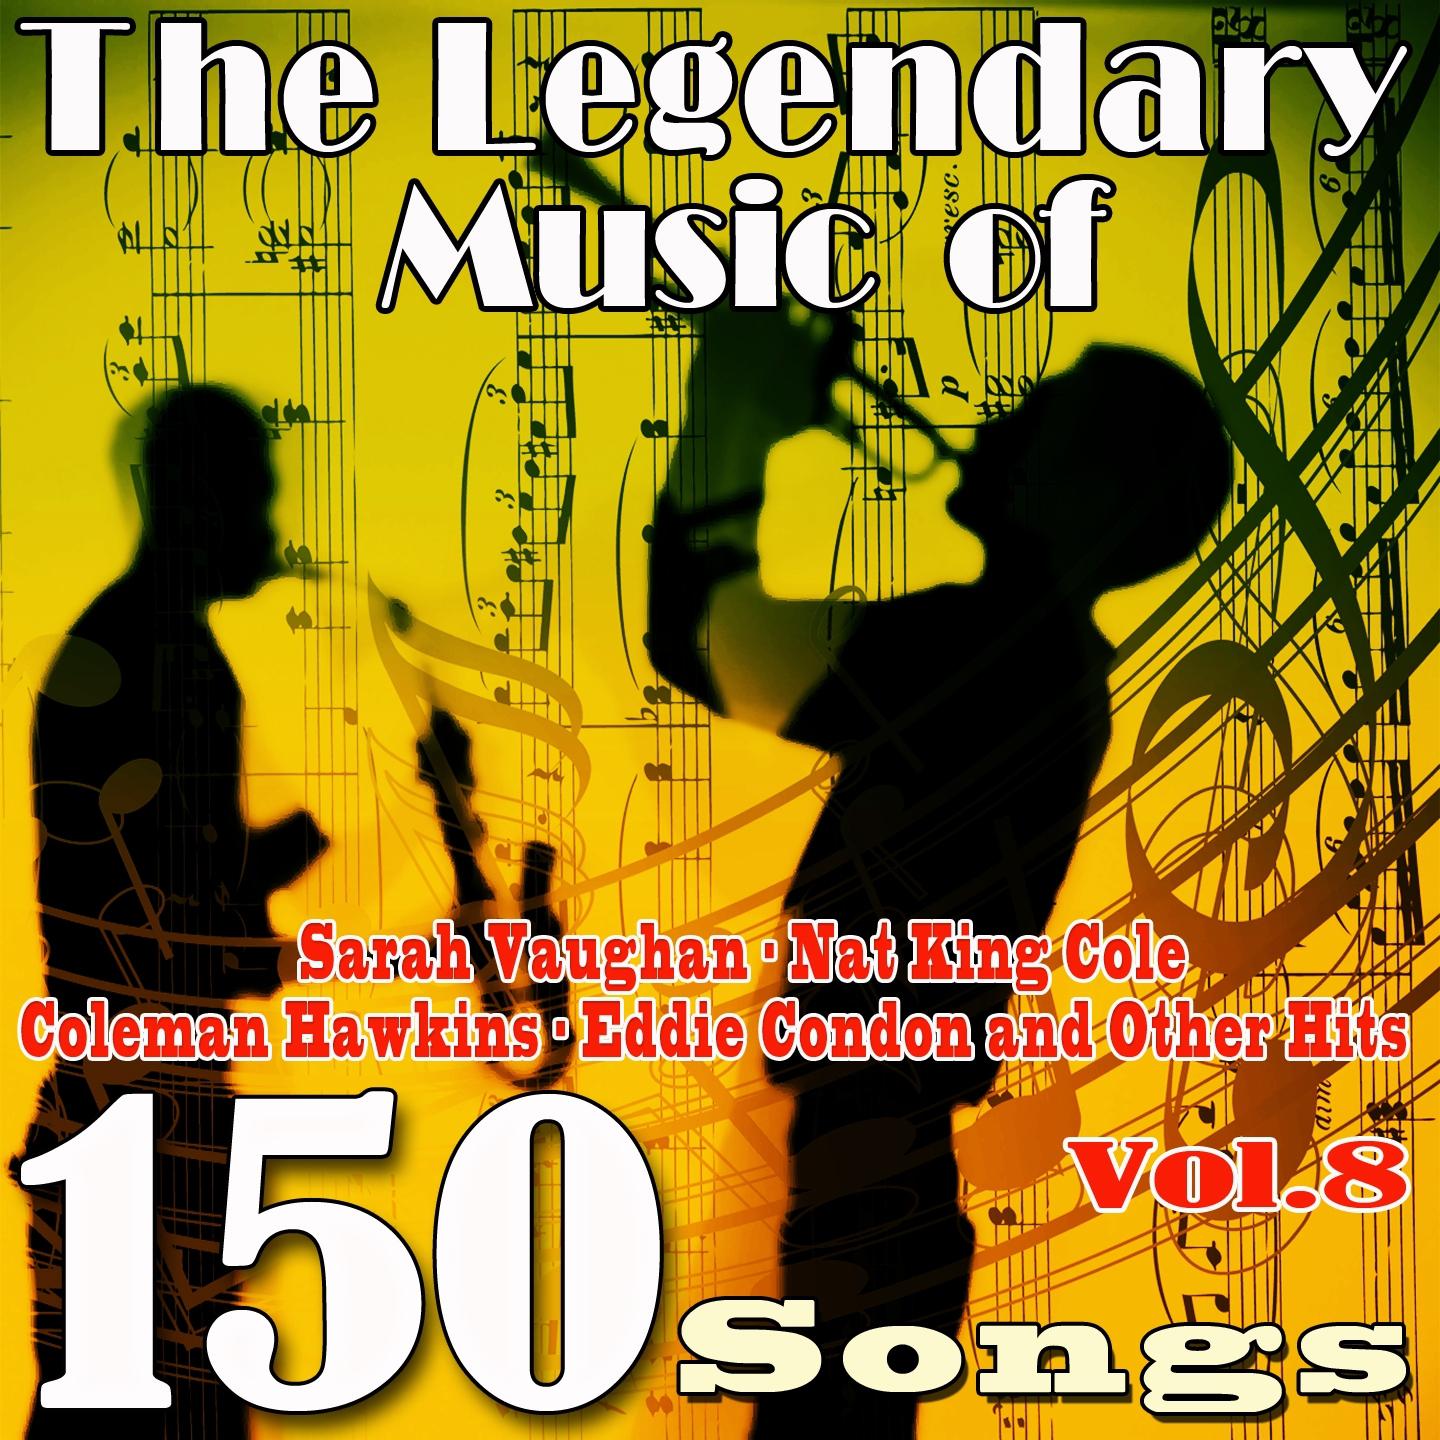 The Legendary Music of Sarah Vaughan, Nat King Cole, Coleman Hawkins, Eddie Condon and Other Hits, Vol. 8 (150 Songs)